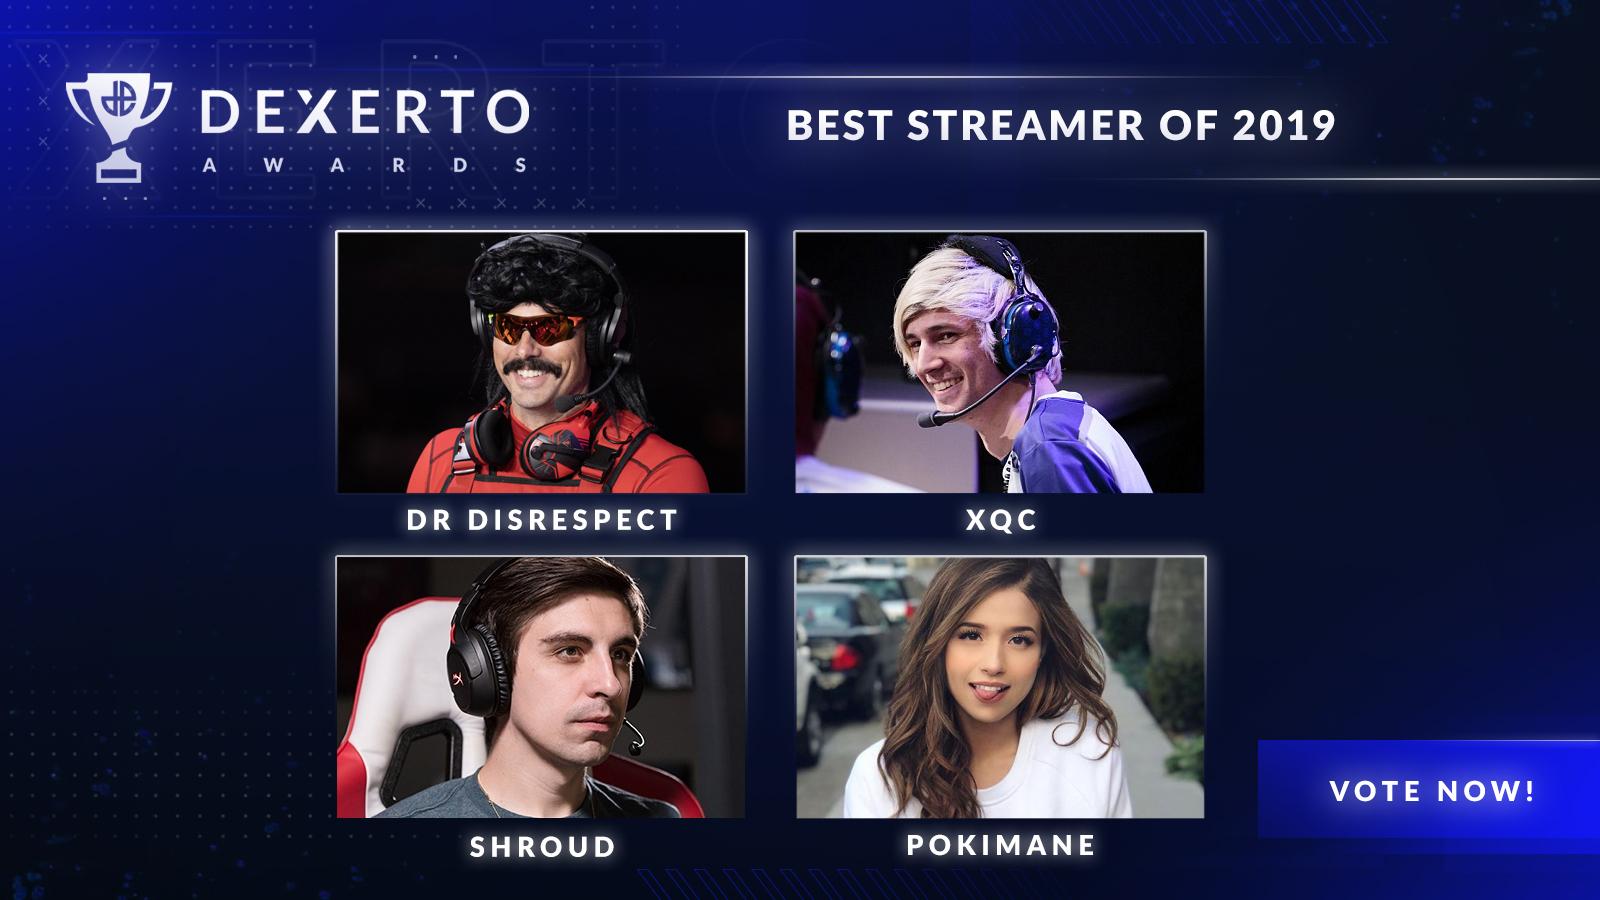 The best streamers of 2019 on Twitch and Mixer